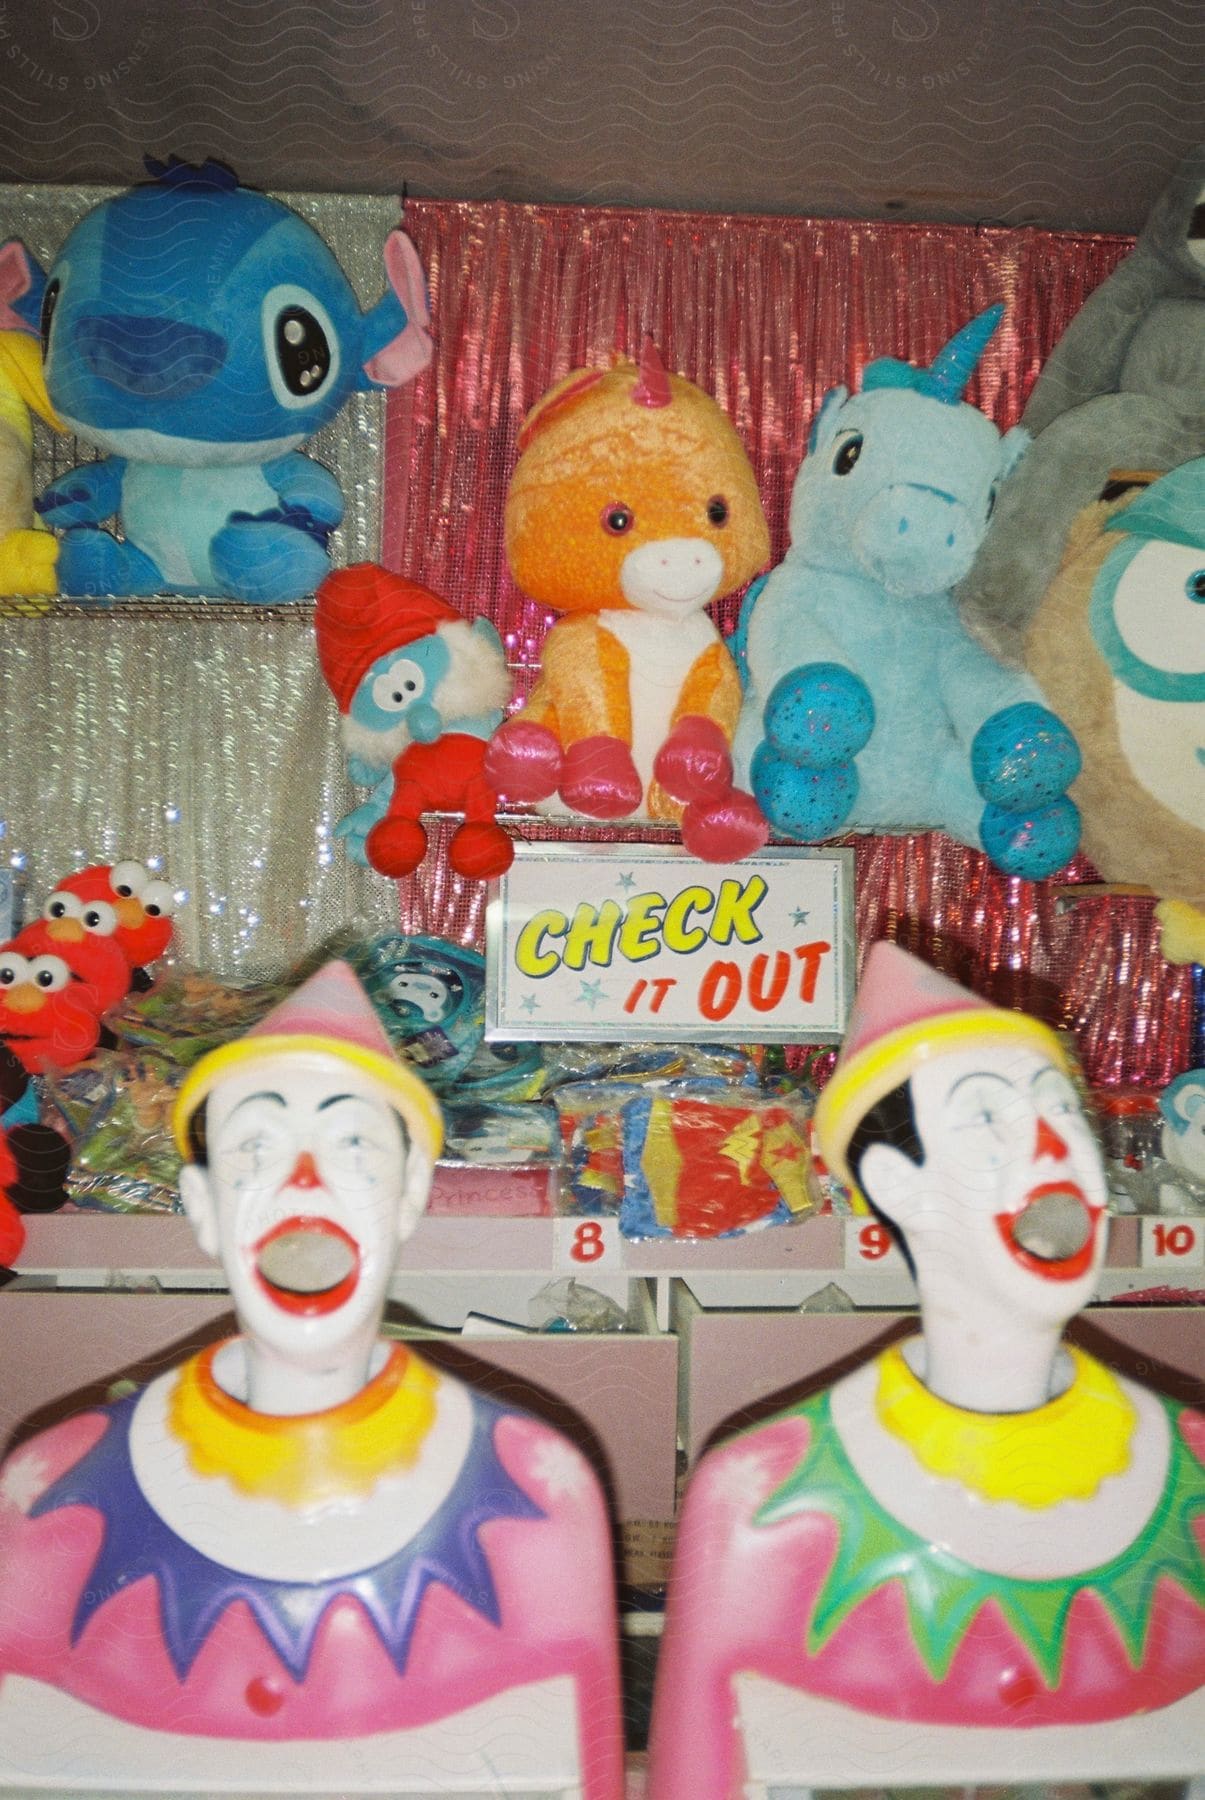 Stuffed animal prizes in a carnival game